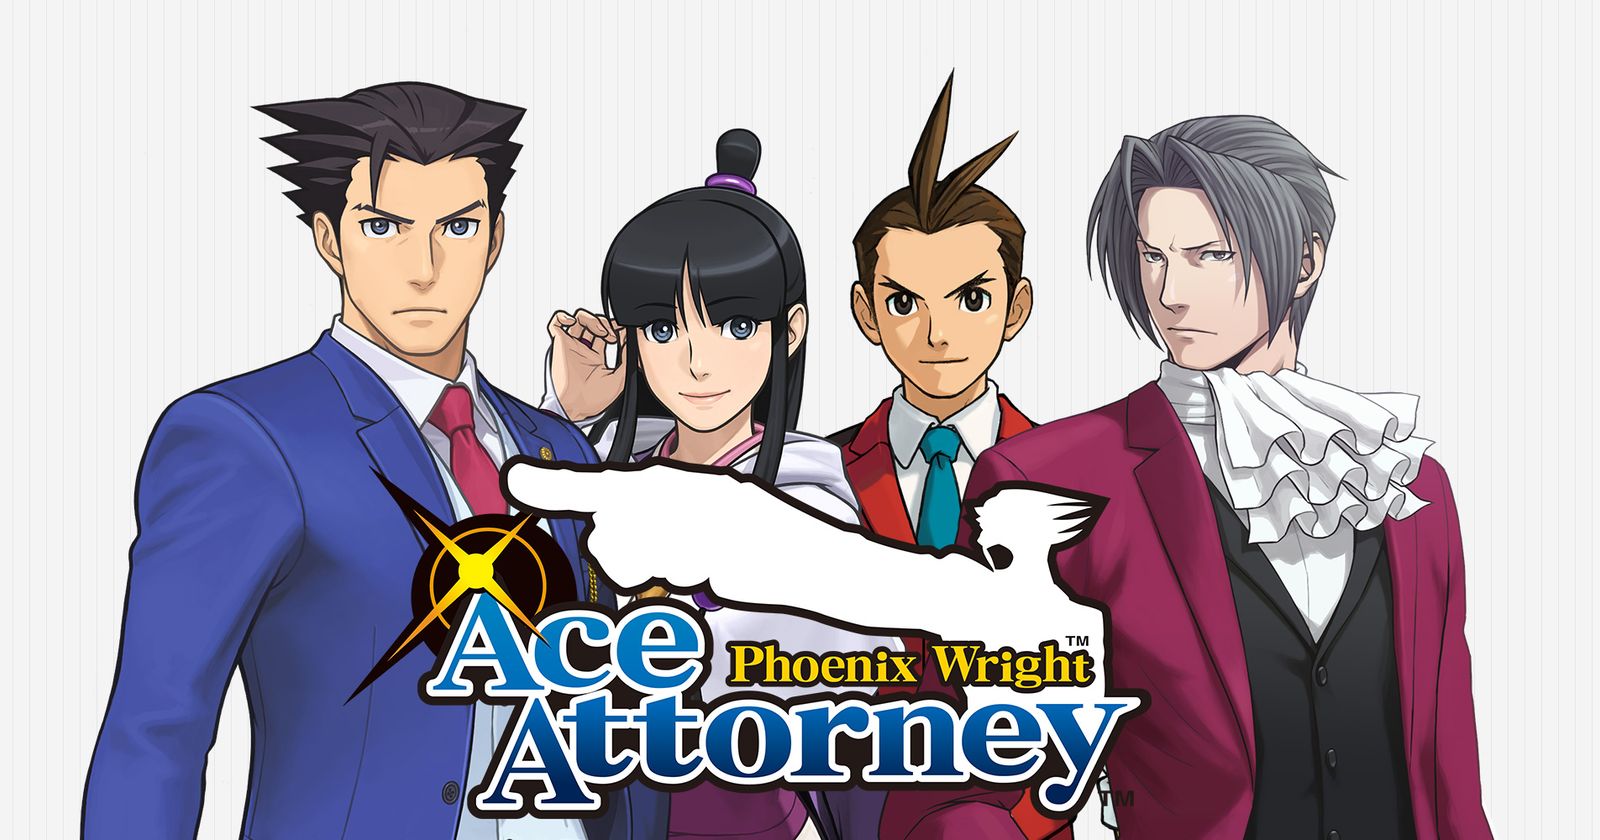 Capcom, please give us more Ace Attorney PC ports